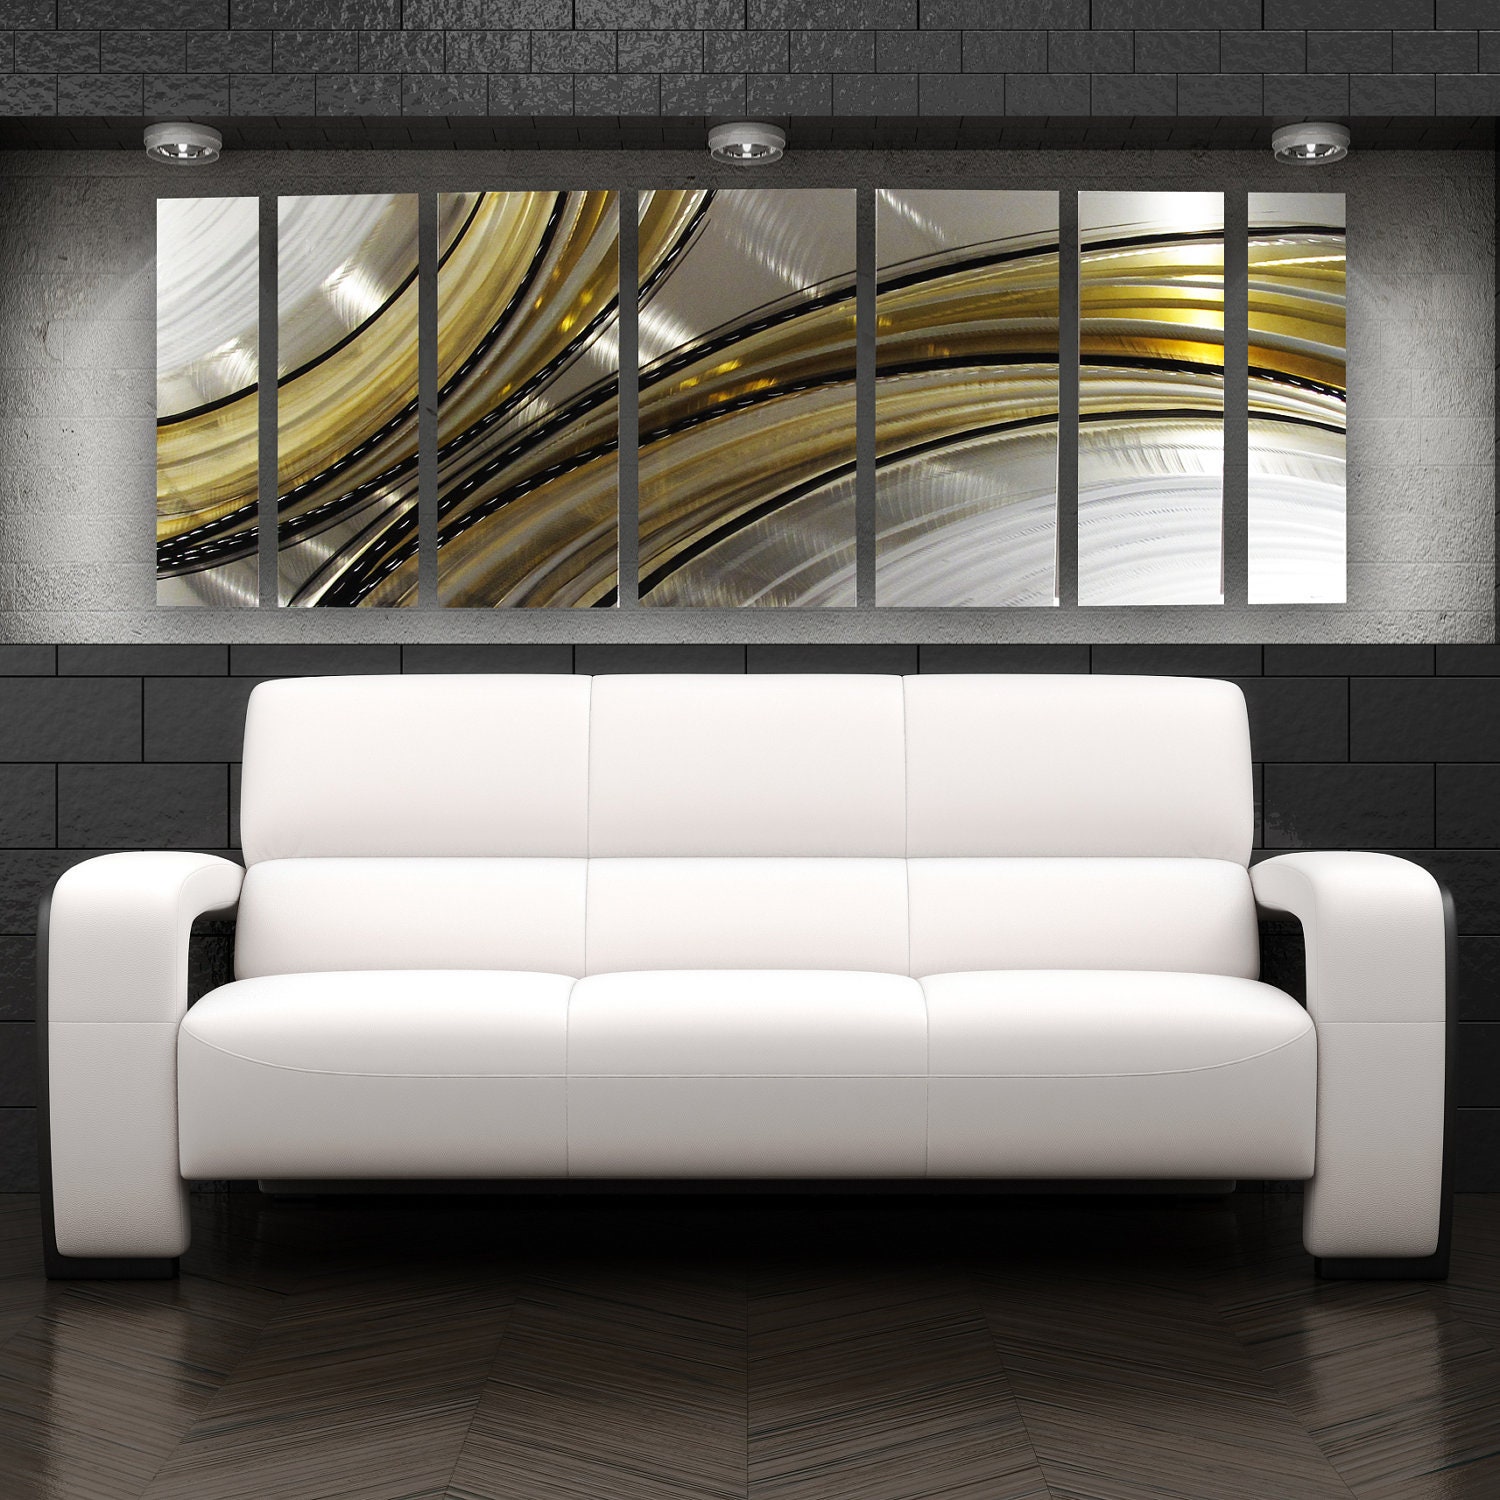 Modern Art Contemporary Abstract Metal Wall Sculpture Work Painting Large Decor 